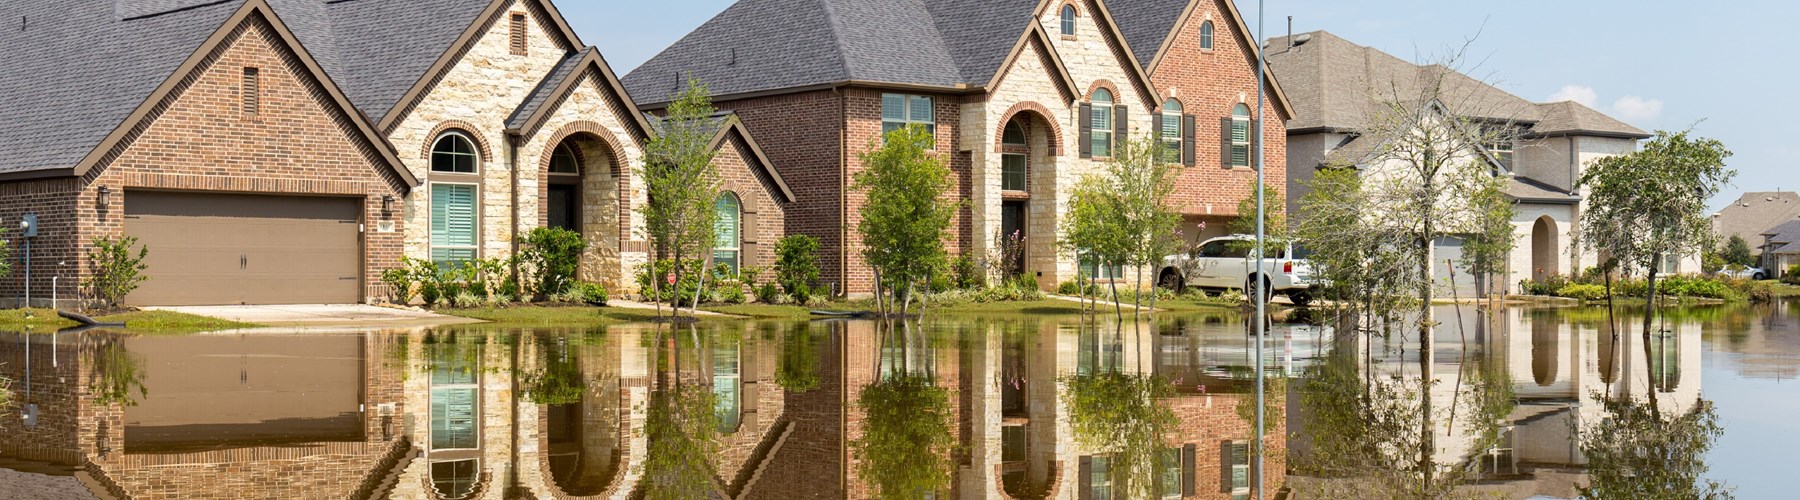 Three flooded houses with reflections in water 